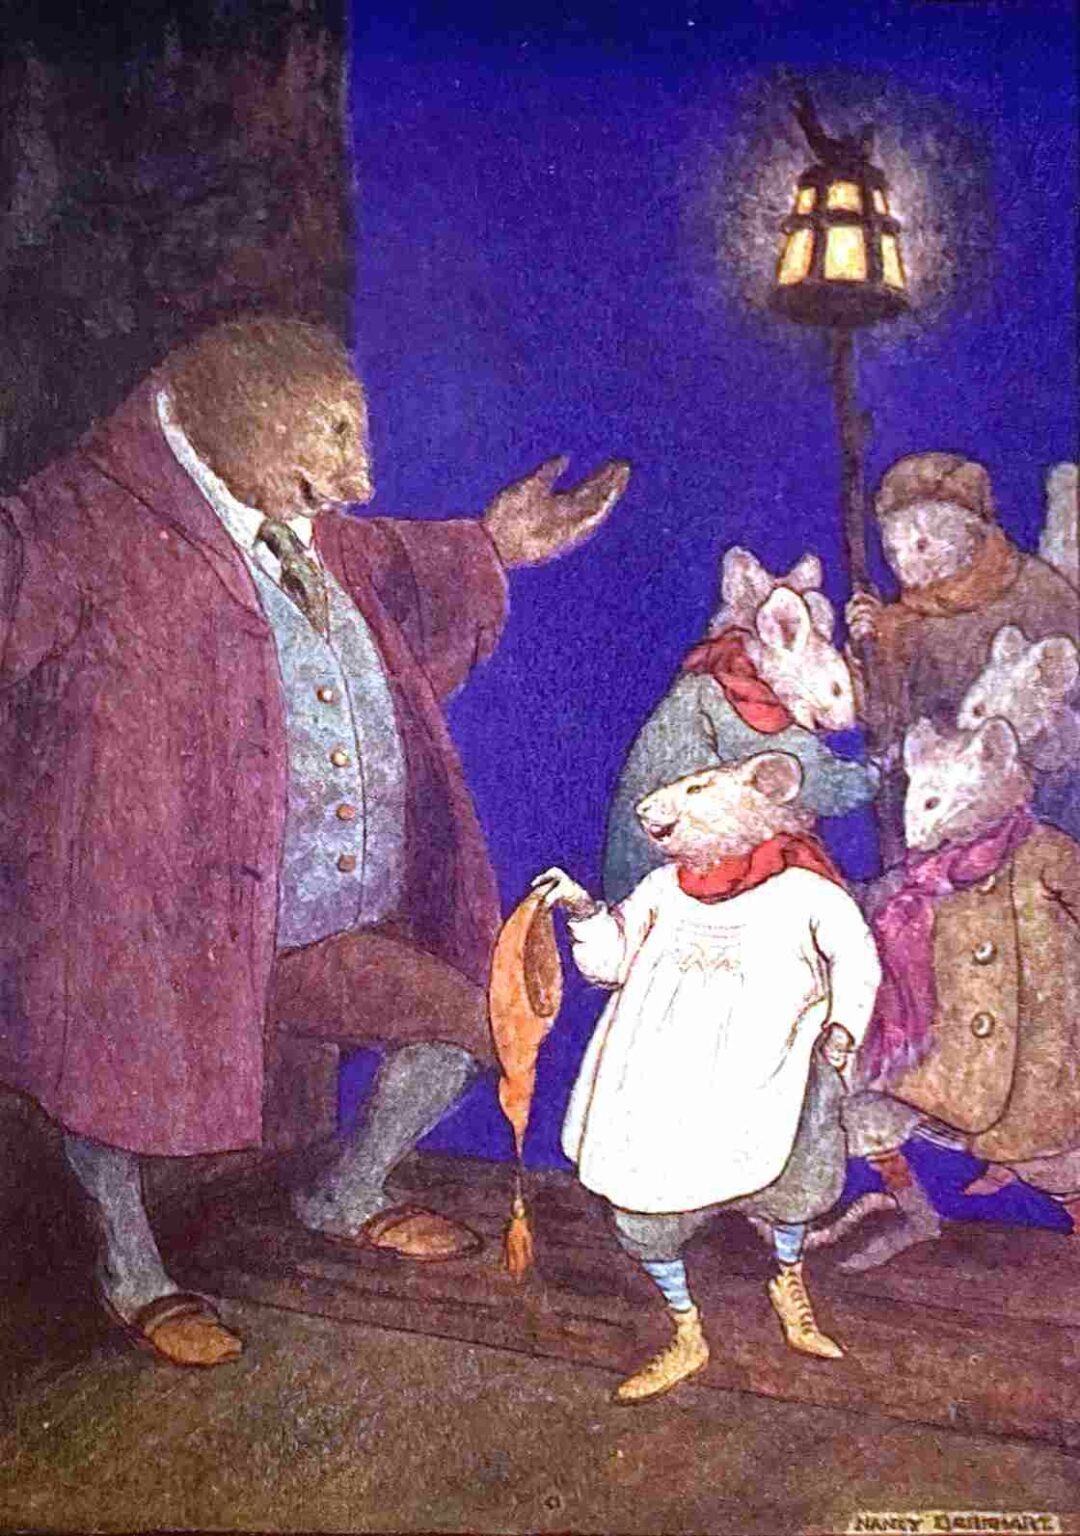 The Wind In The Willows by Kenneth Grahame Analysis | SLAP HAPPY LARRY